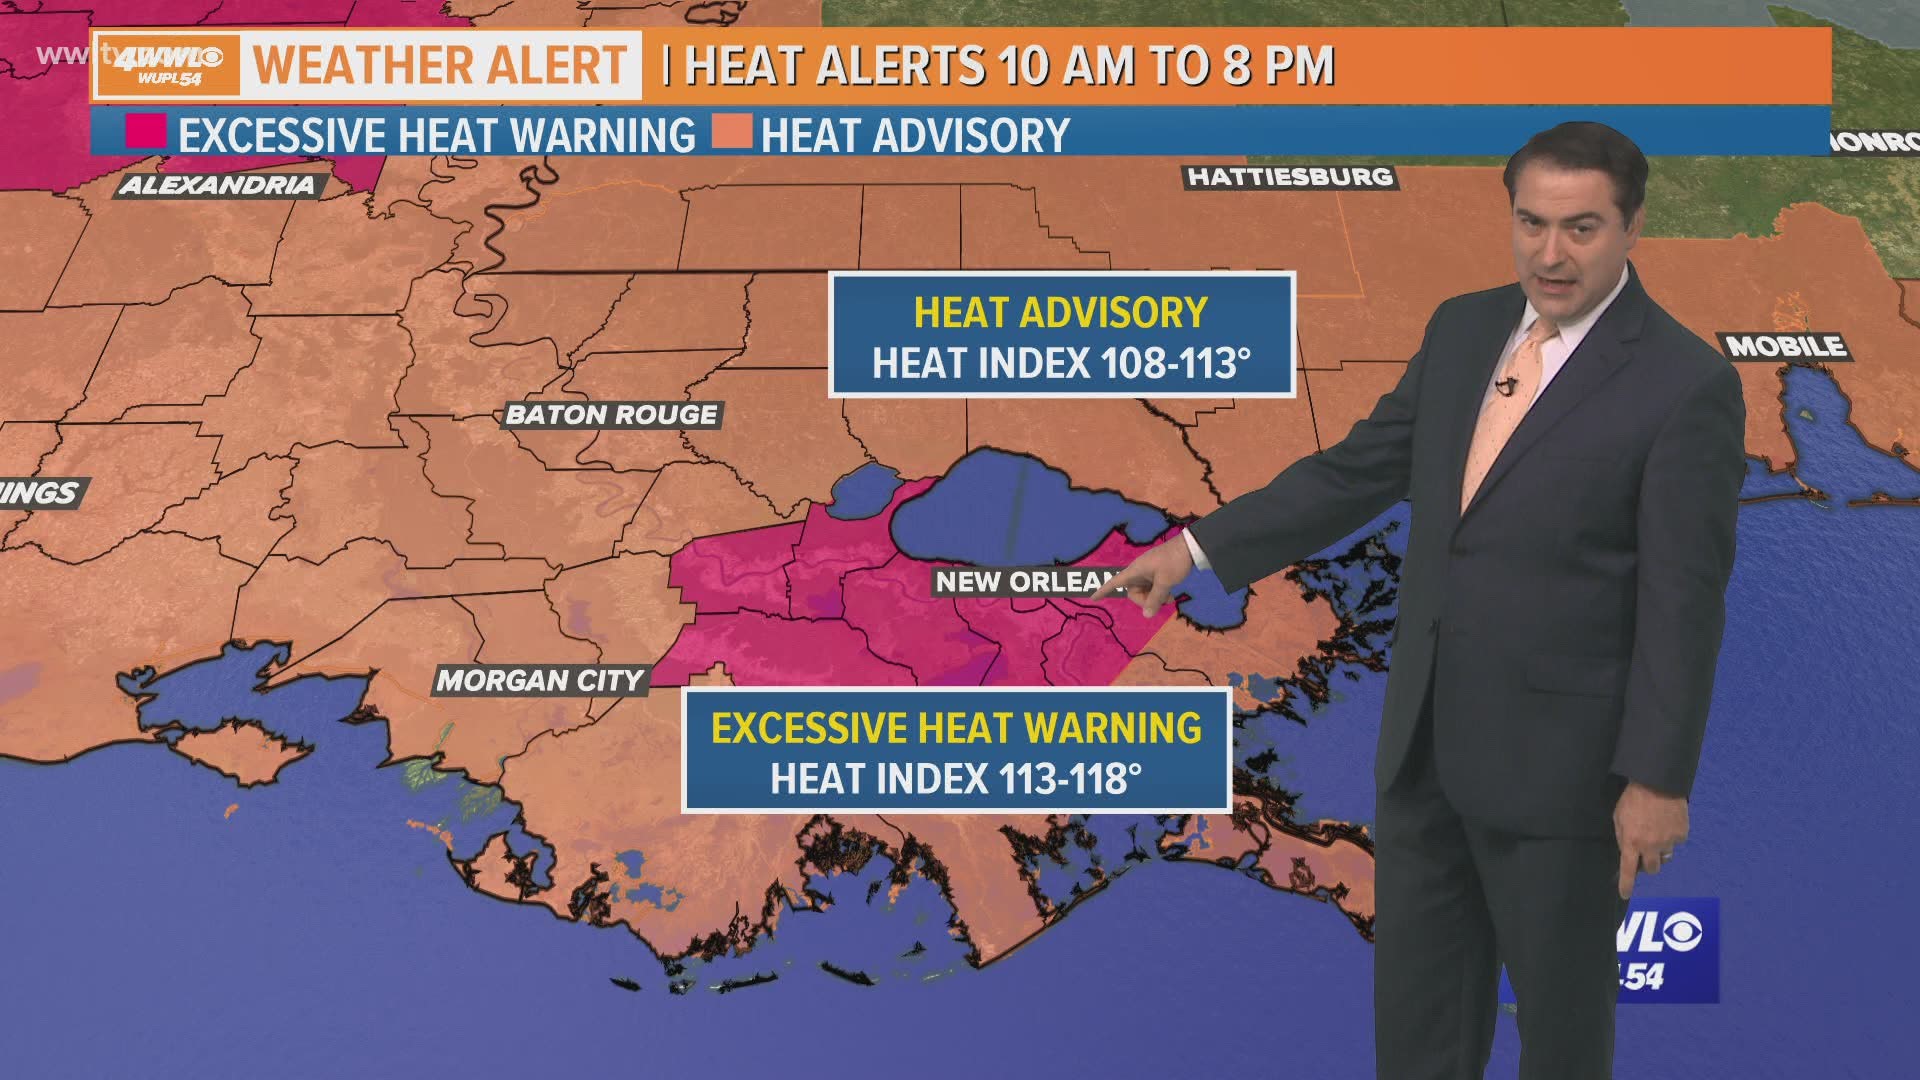 Meteorologist Dave Nussbaum says there area more heat alerts today with the heat index of 108-118°. Expect a little better chance for daily storms and more heat.